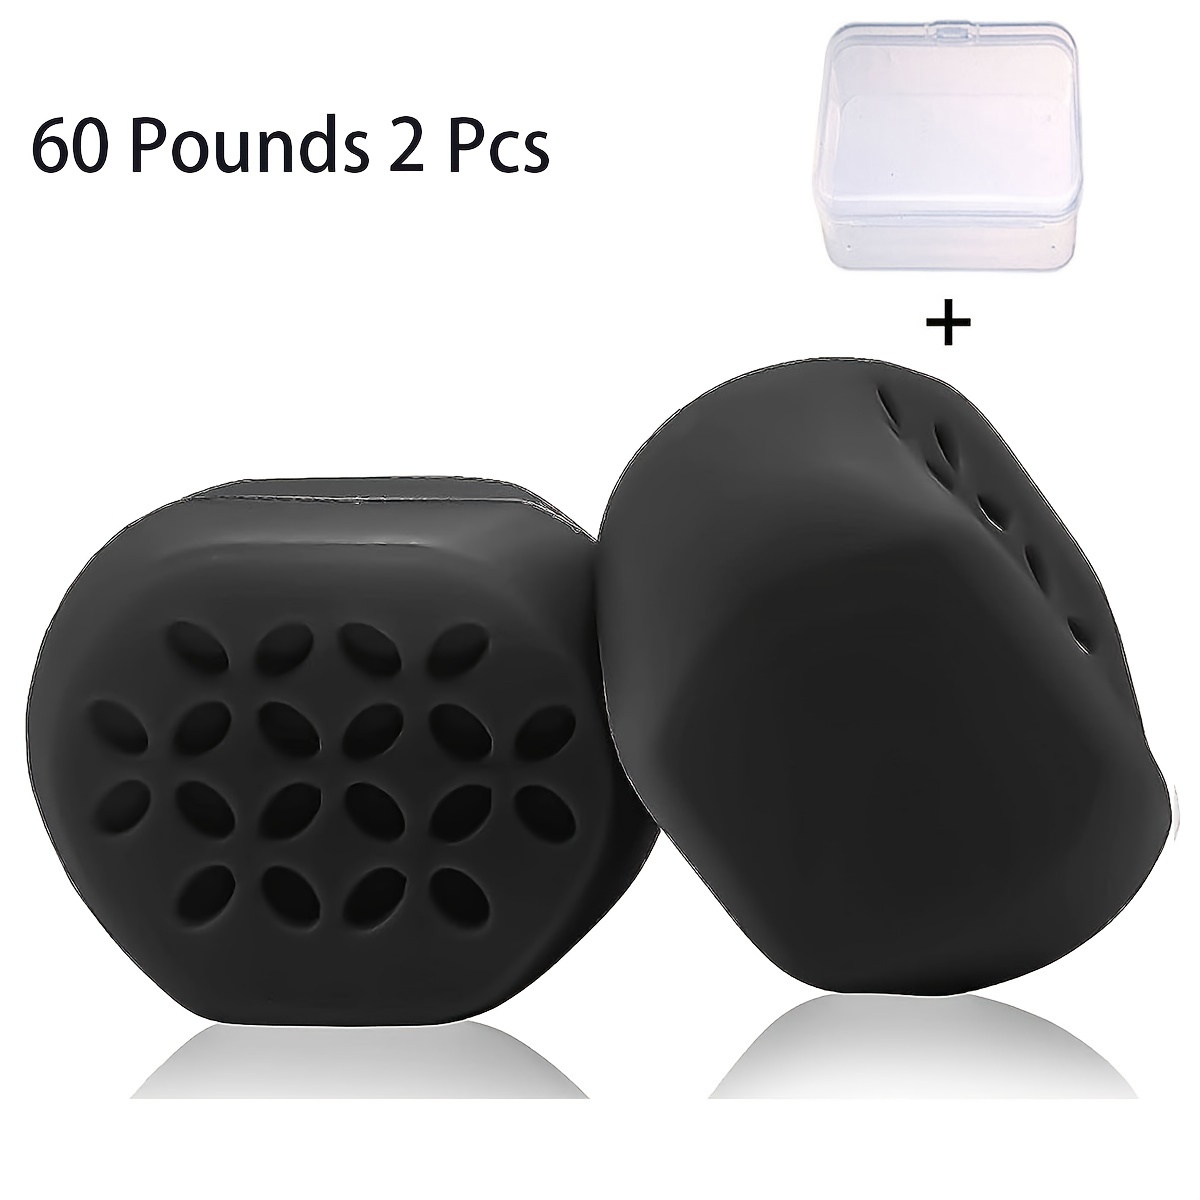 40LBS Jaw Line Exerciser Ball Jaw Exerciser Neck Face Facial Muscle Trainer  JawLine Chew Ball Workout Fitness Equipment